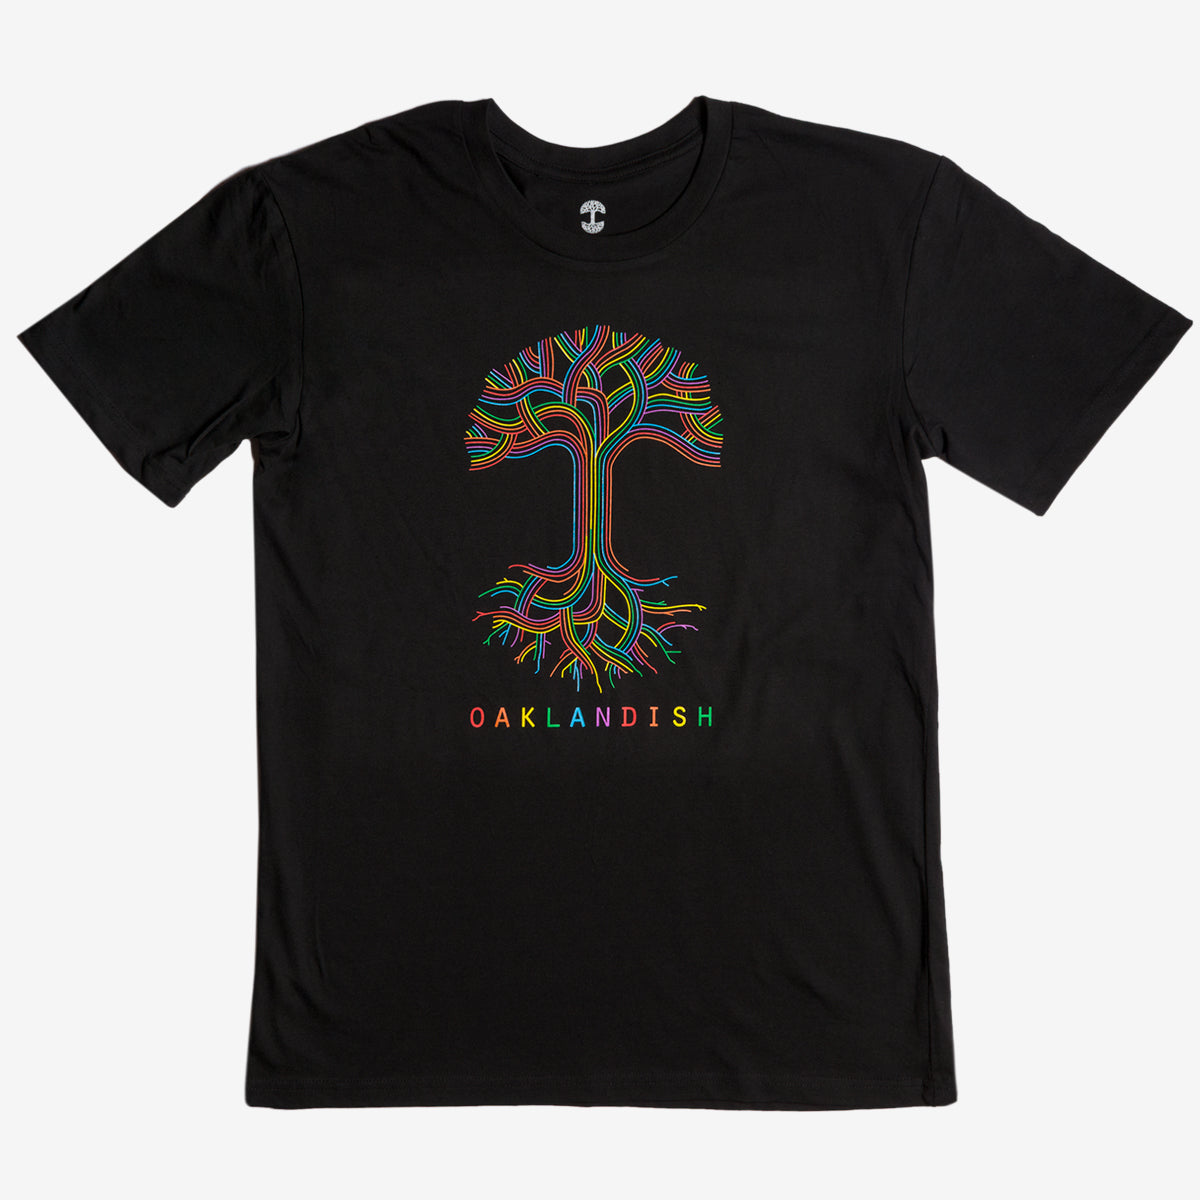 Black t-shirt with an outline of Oaklandish tree logo in rainbow colors and rainbow Oaklandish wordmark.